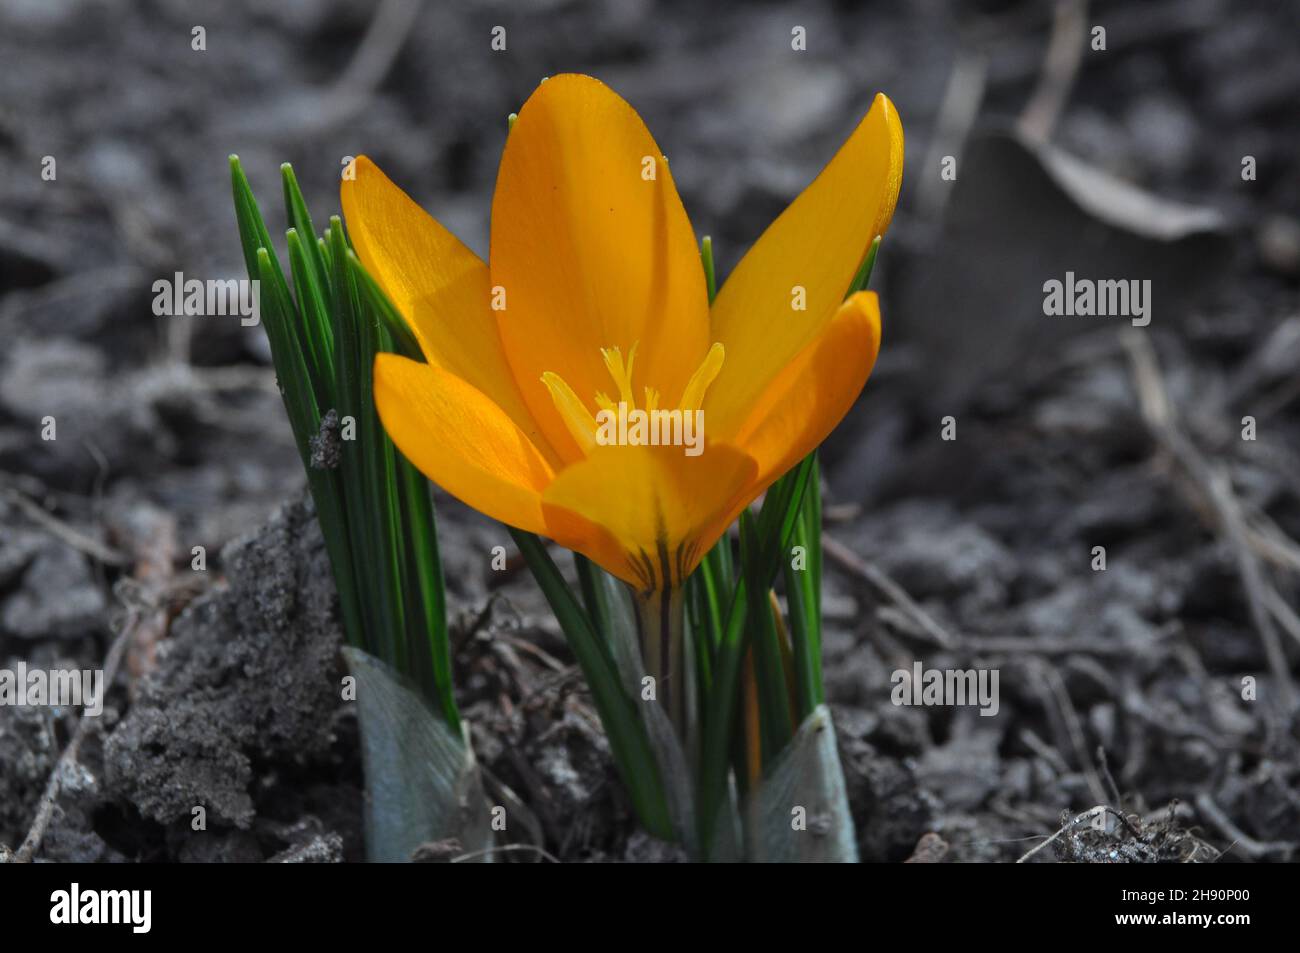 Crocus biflorus is yellow. Spring flower close-up on a blurred background.. Garden bulbous plants. Stock Photo